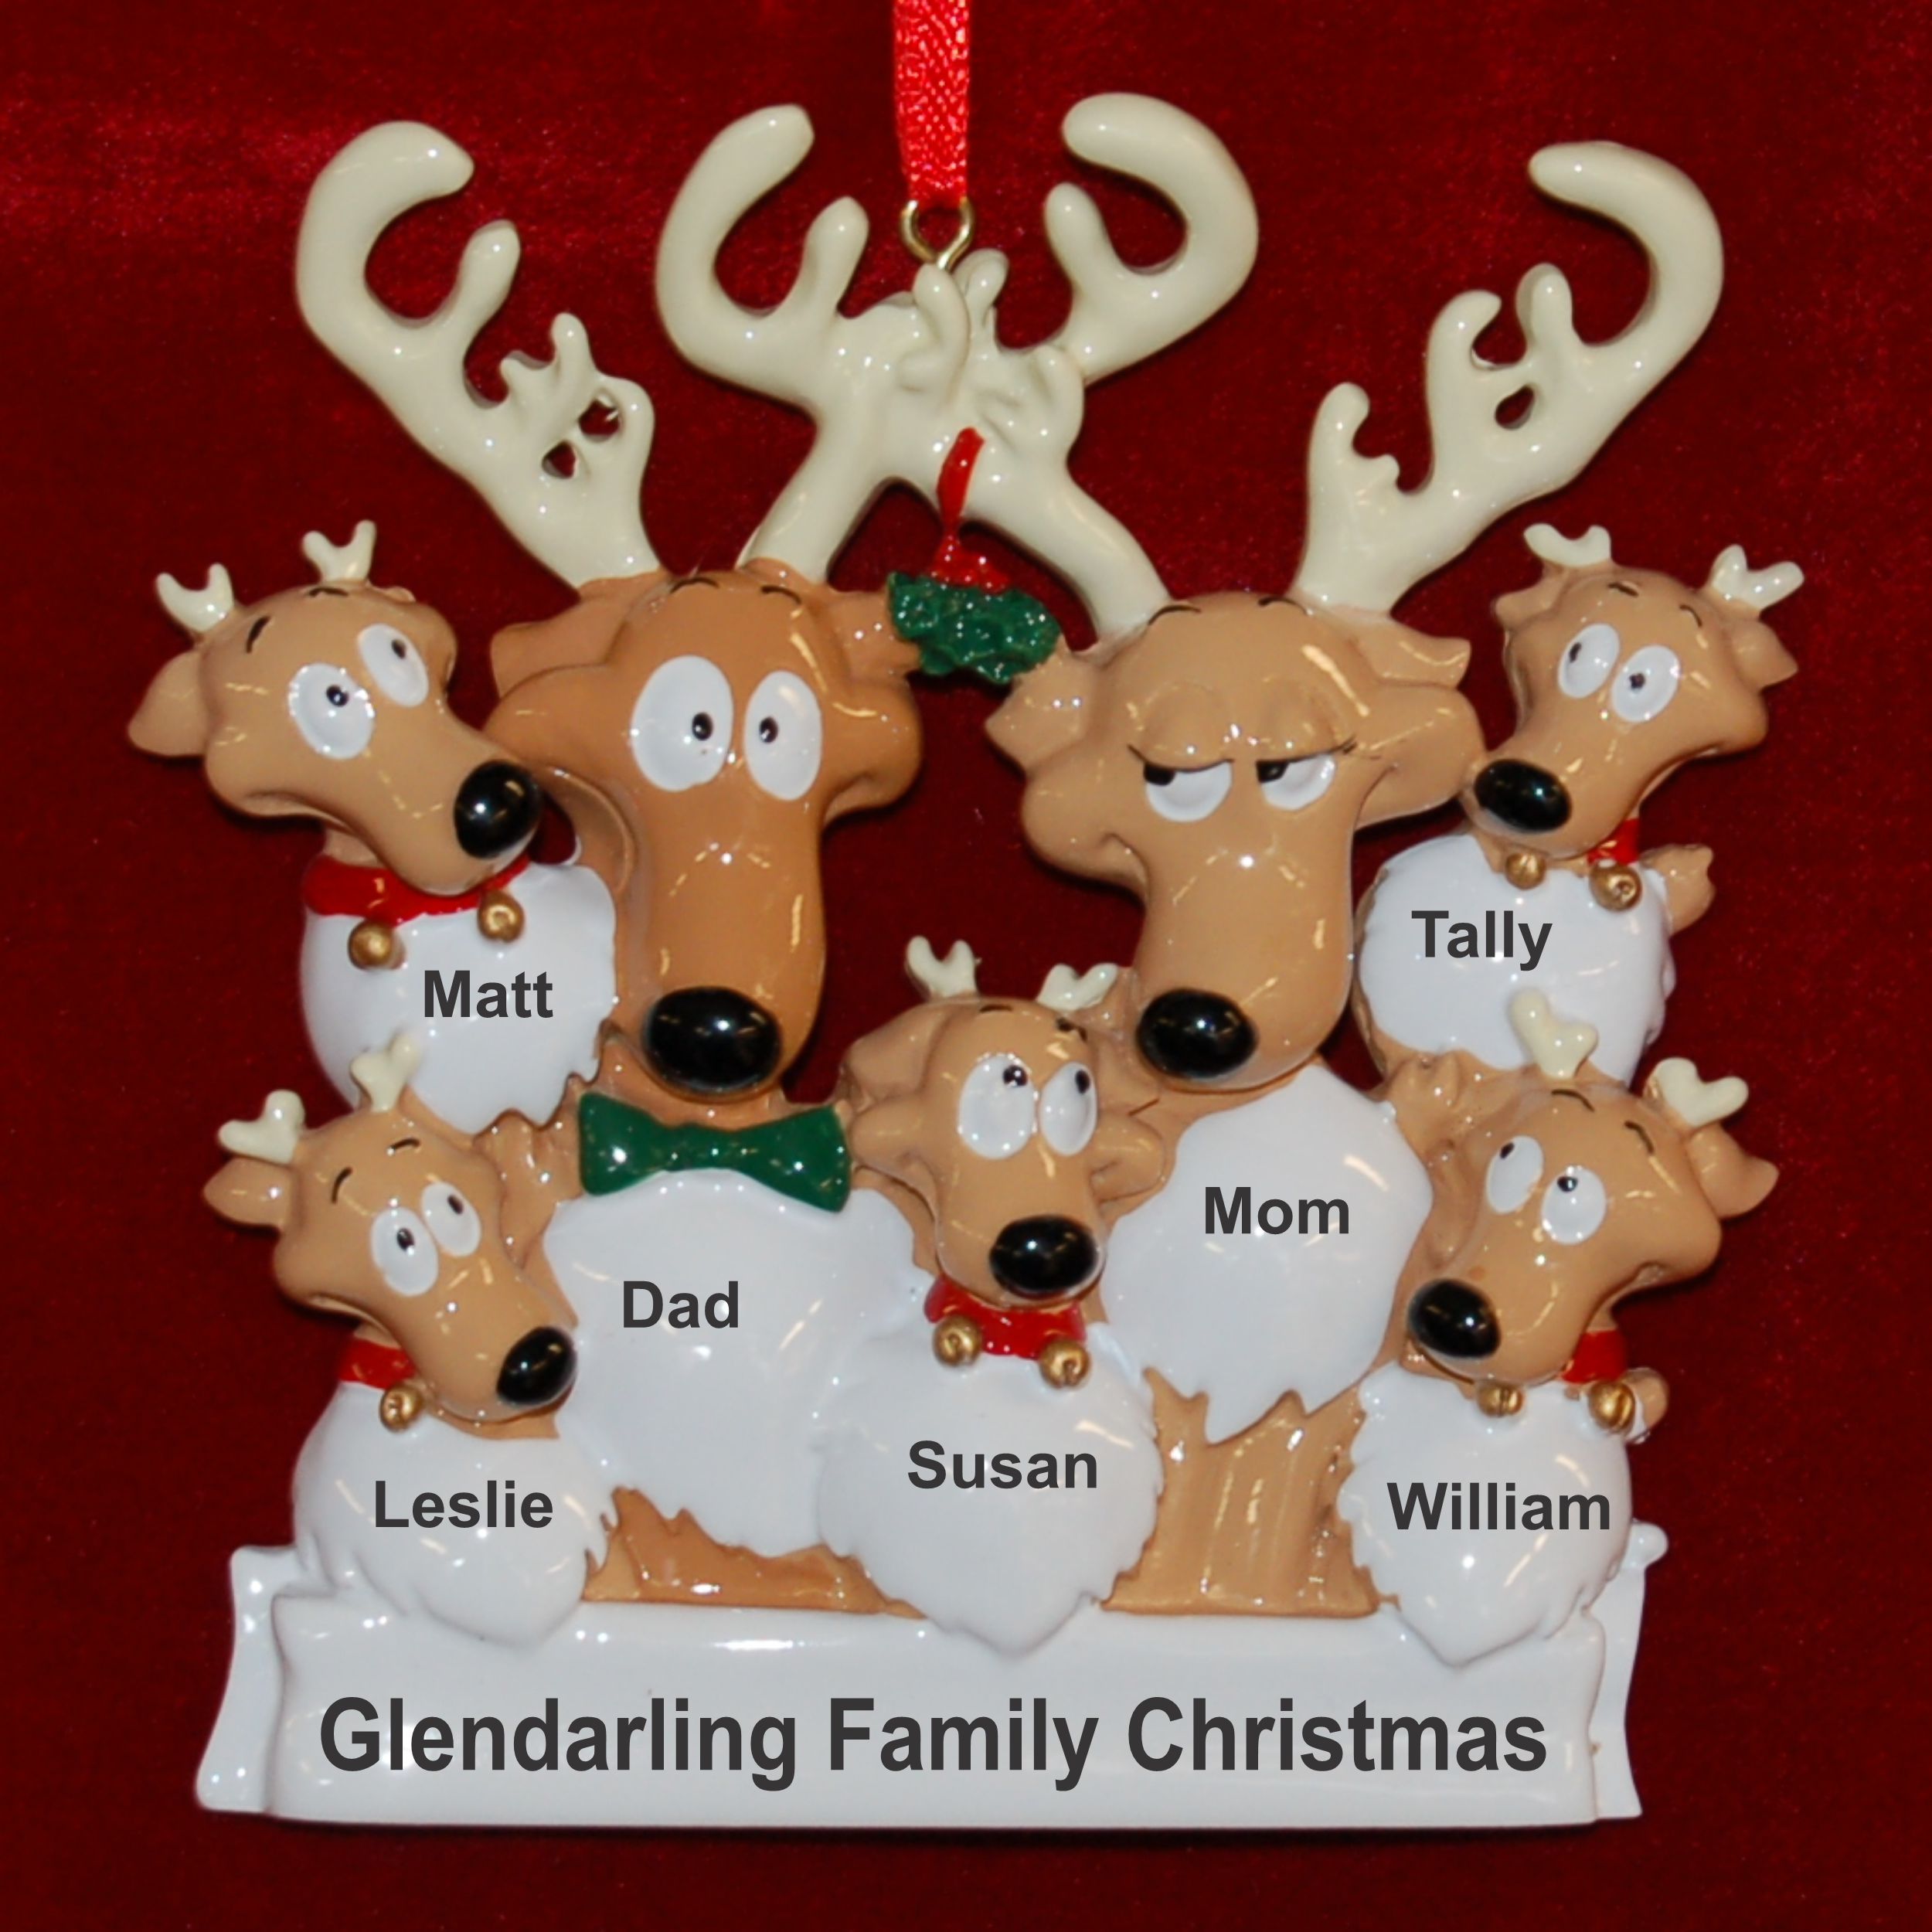 Family Christmas Ornament Reindeer 7 Personalized by RussellRhodes.com